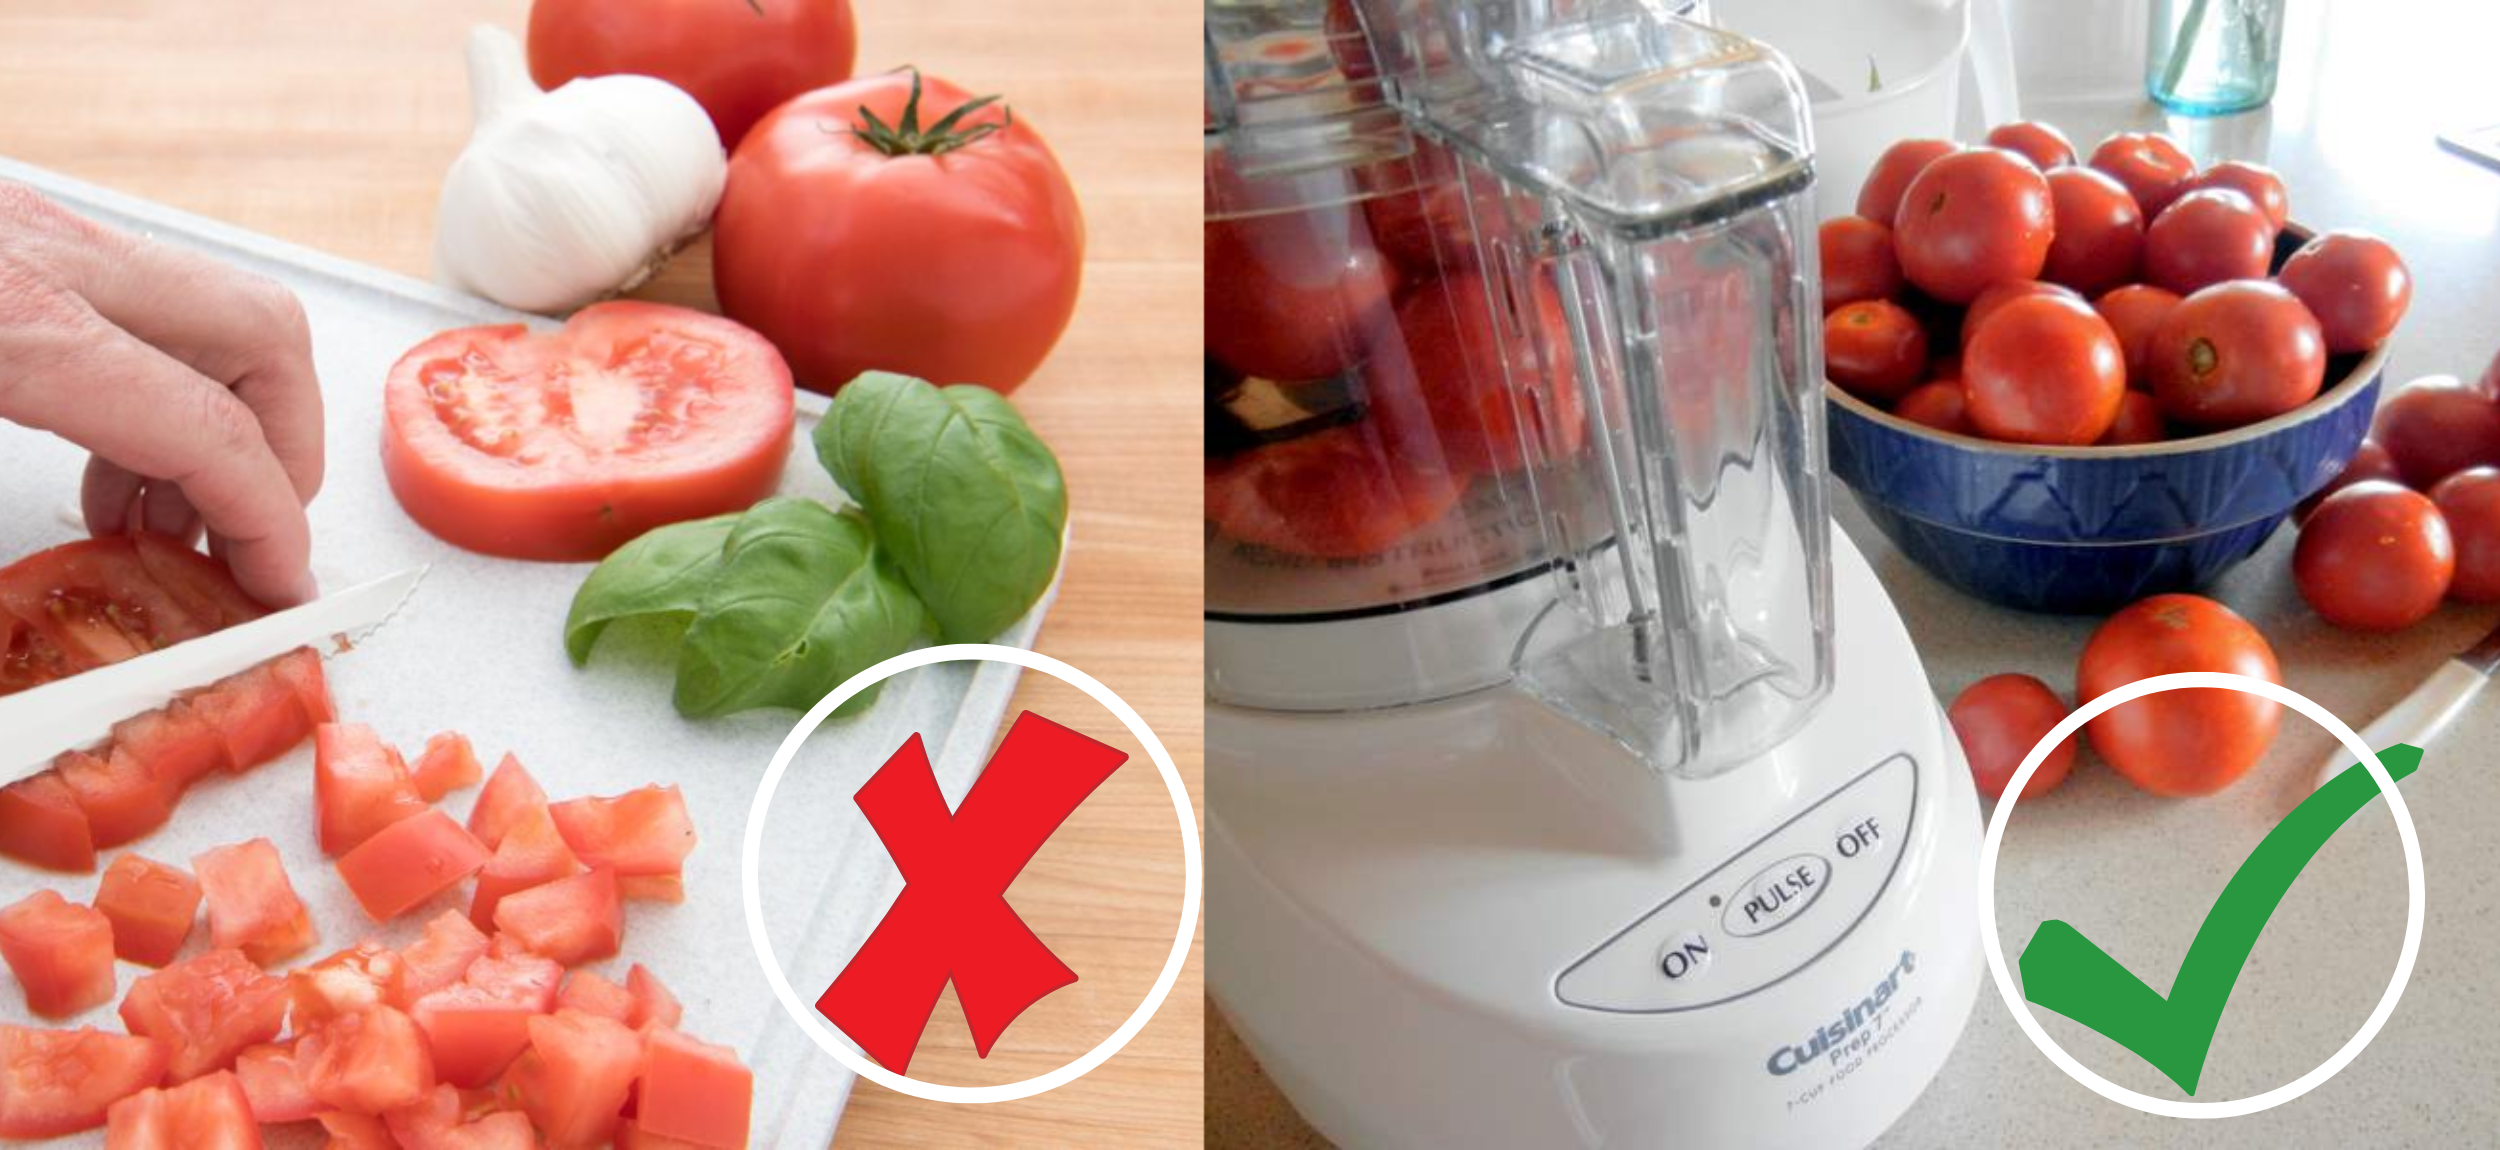 can you dice tomatoes in a food processor